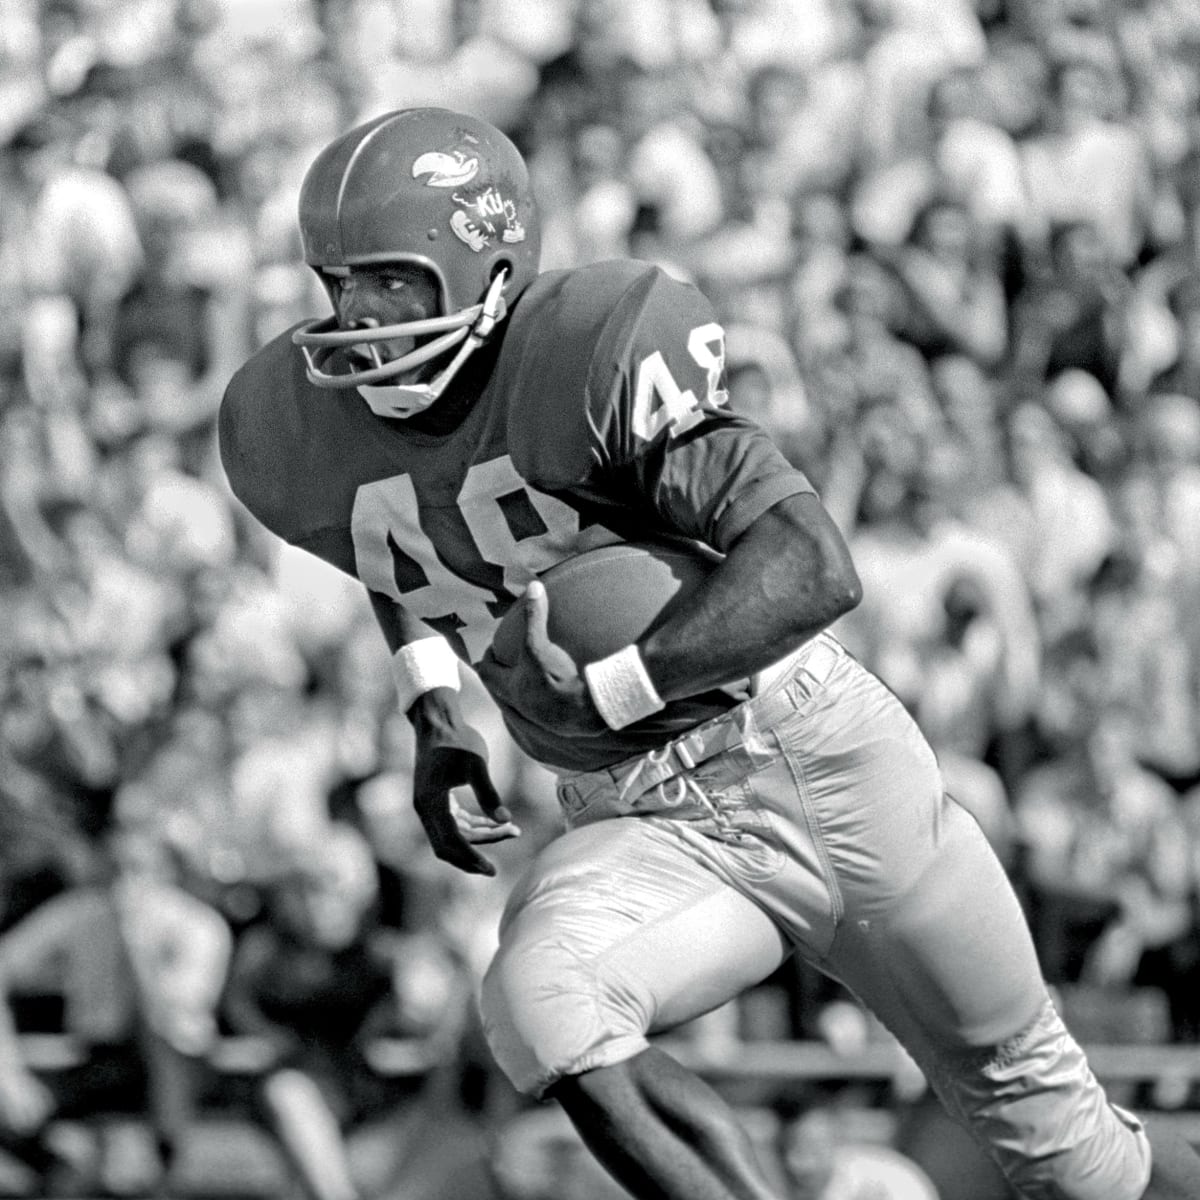 Kansas football: Just how great was Gale Sayers with the Jayhawks?